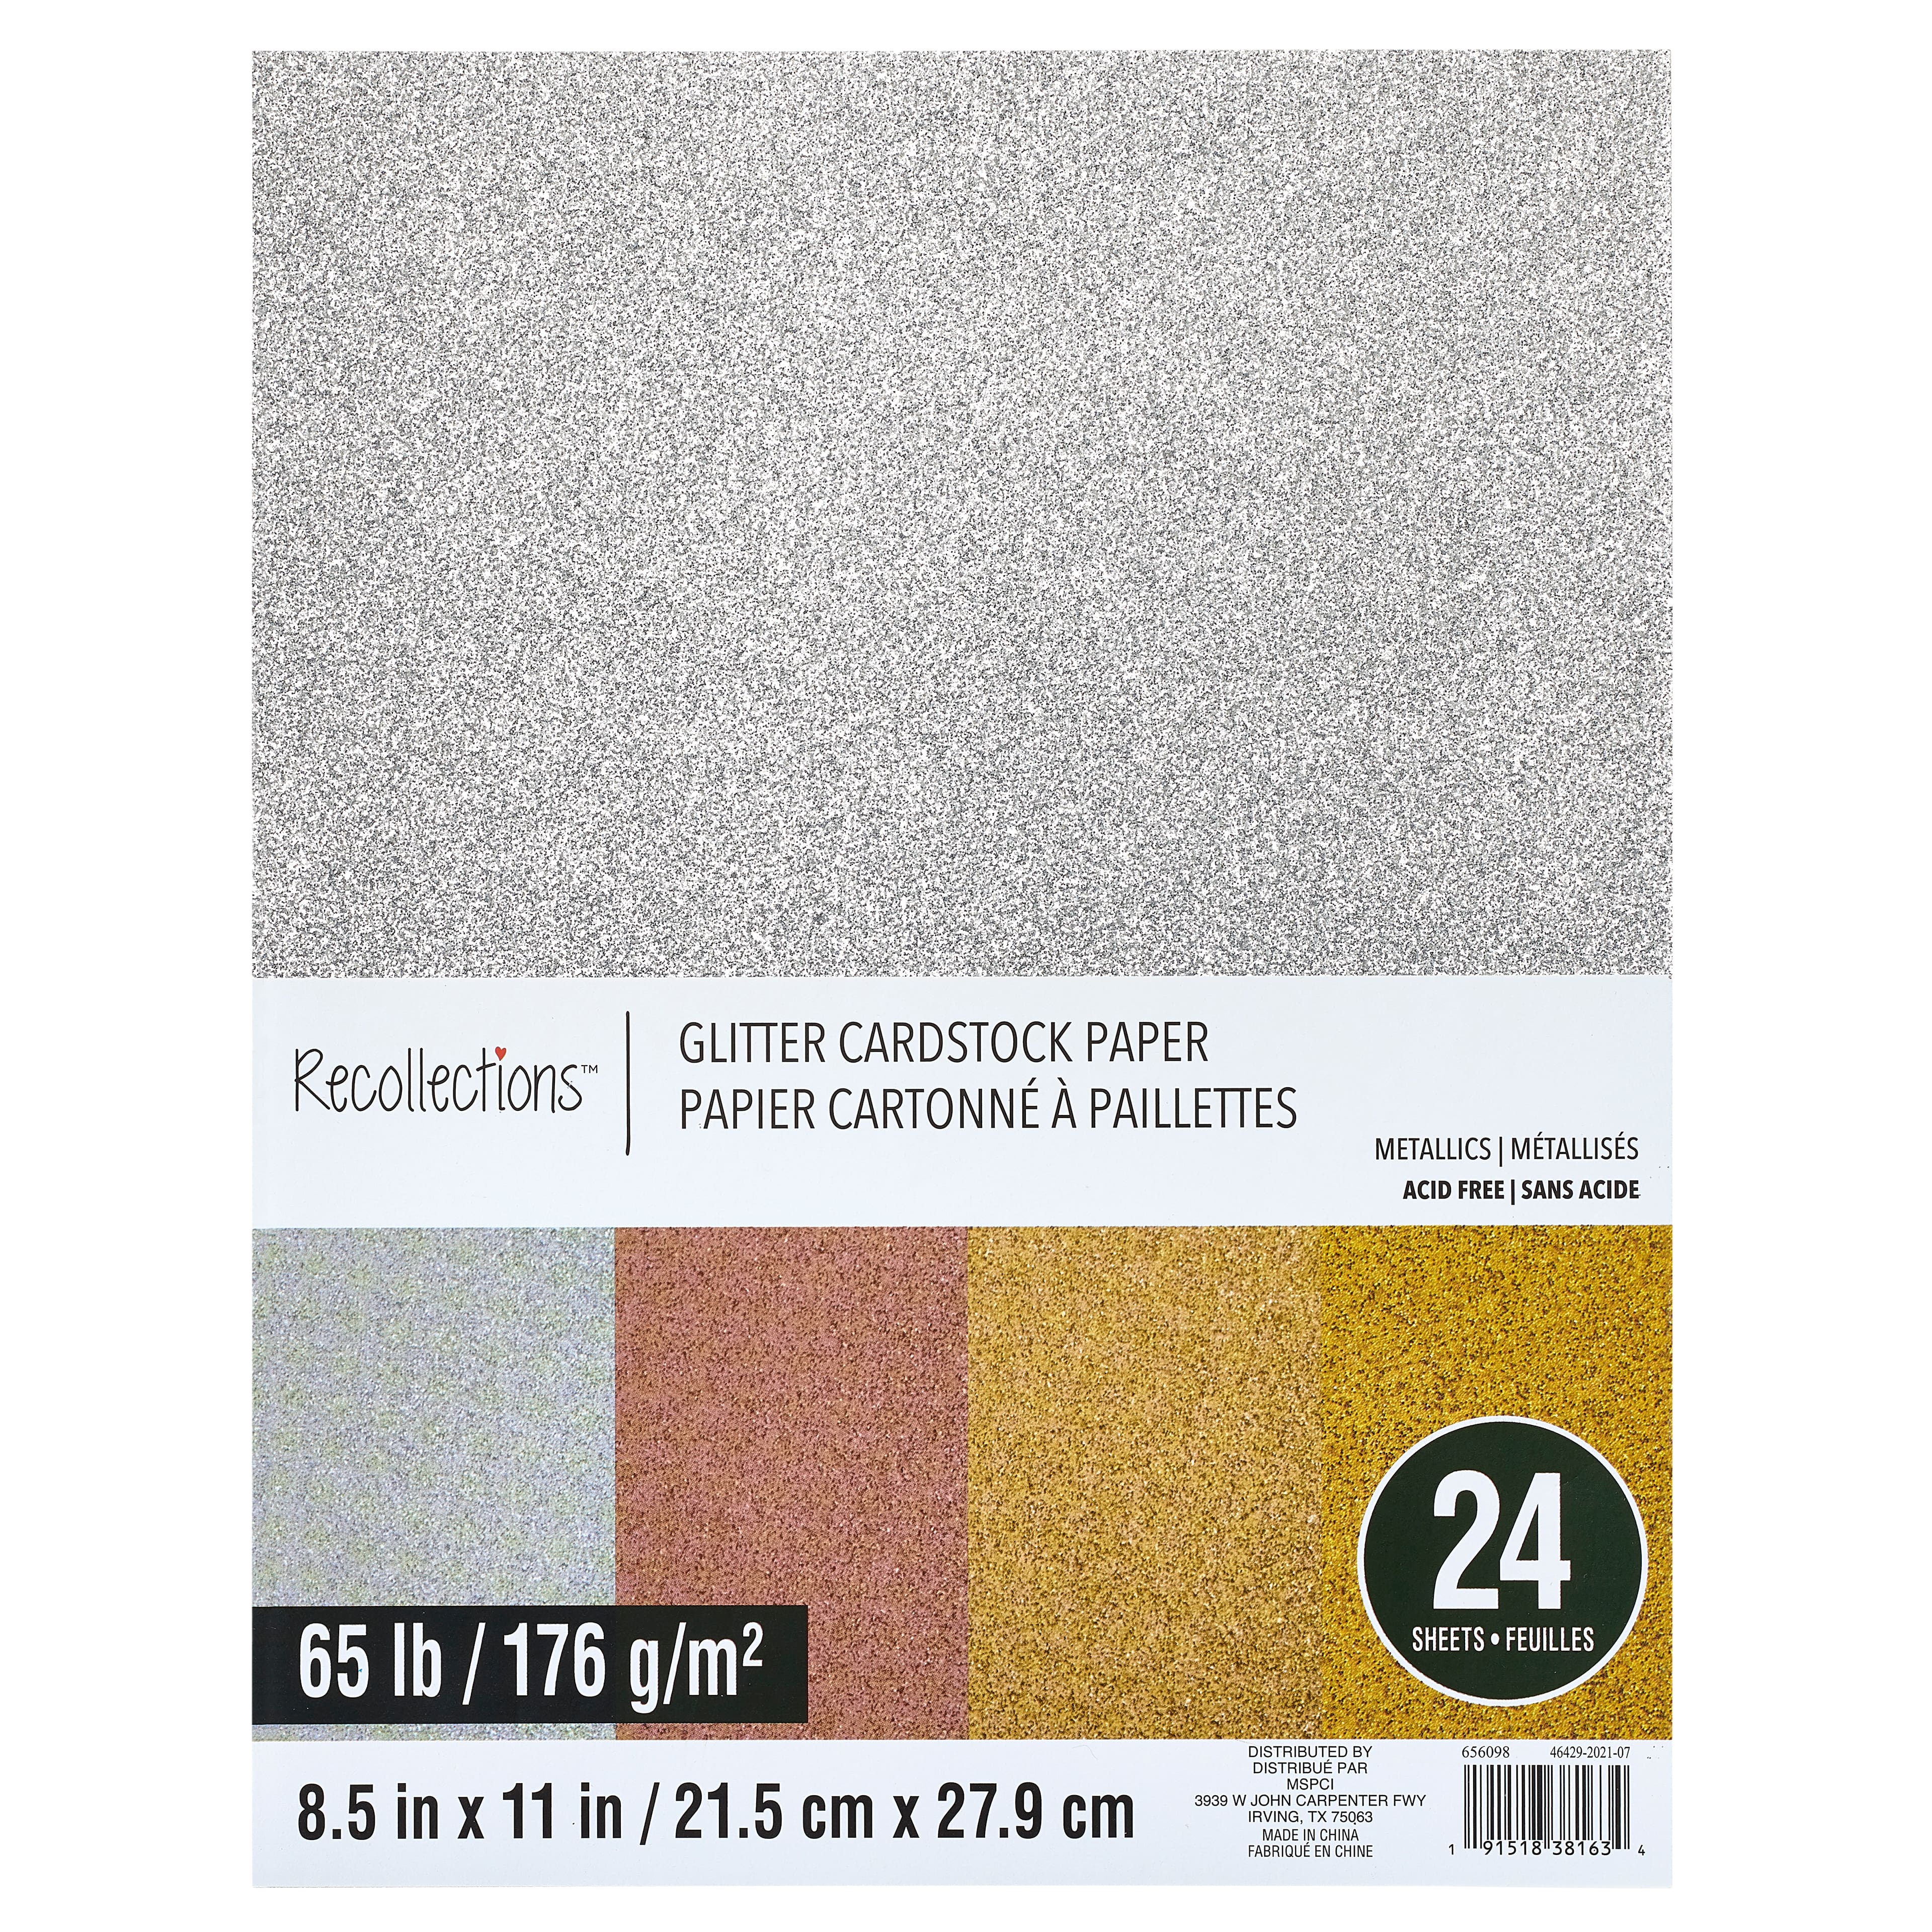 MirriSparkle Silver Glitter Cardstock Paper from Cardstock Warehouse 8.5 x 11 inch- 16 PT/280gsm - 10 Sheets